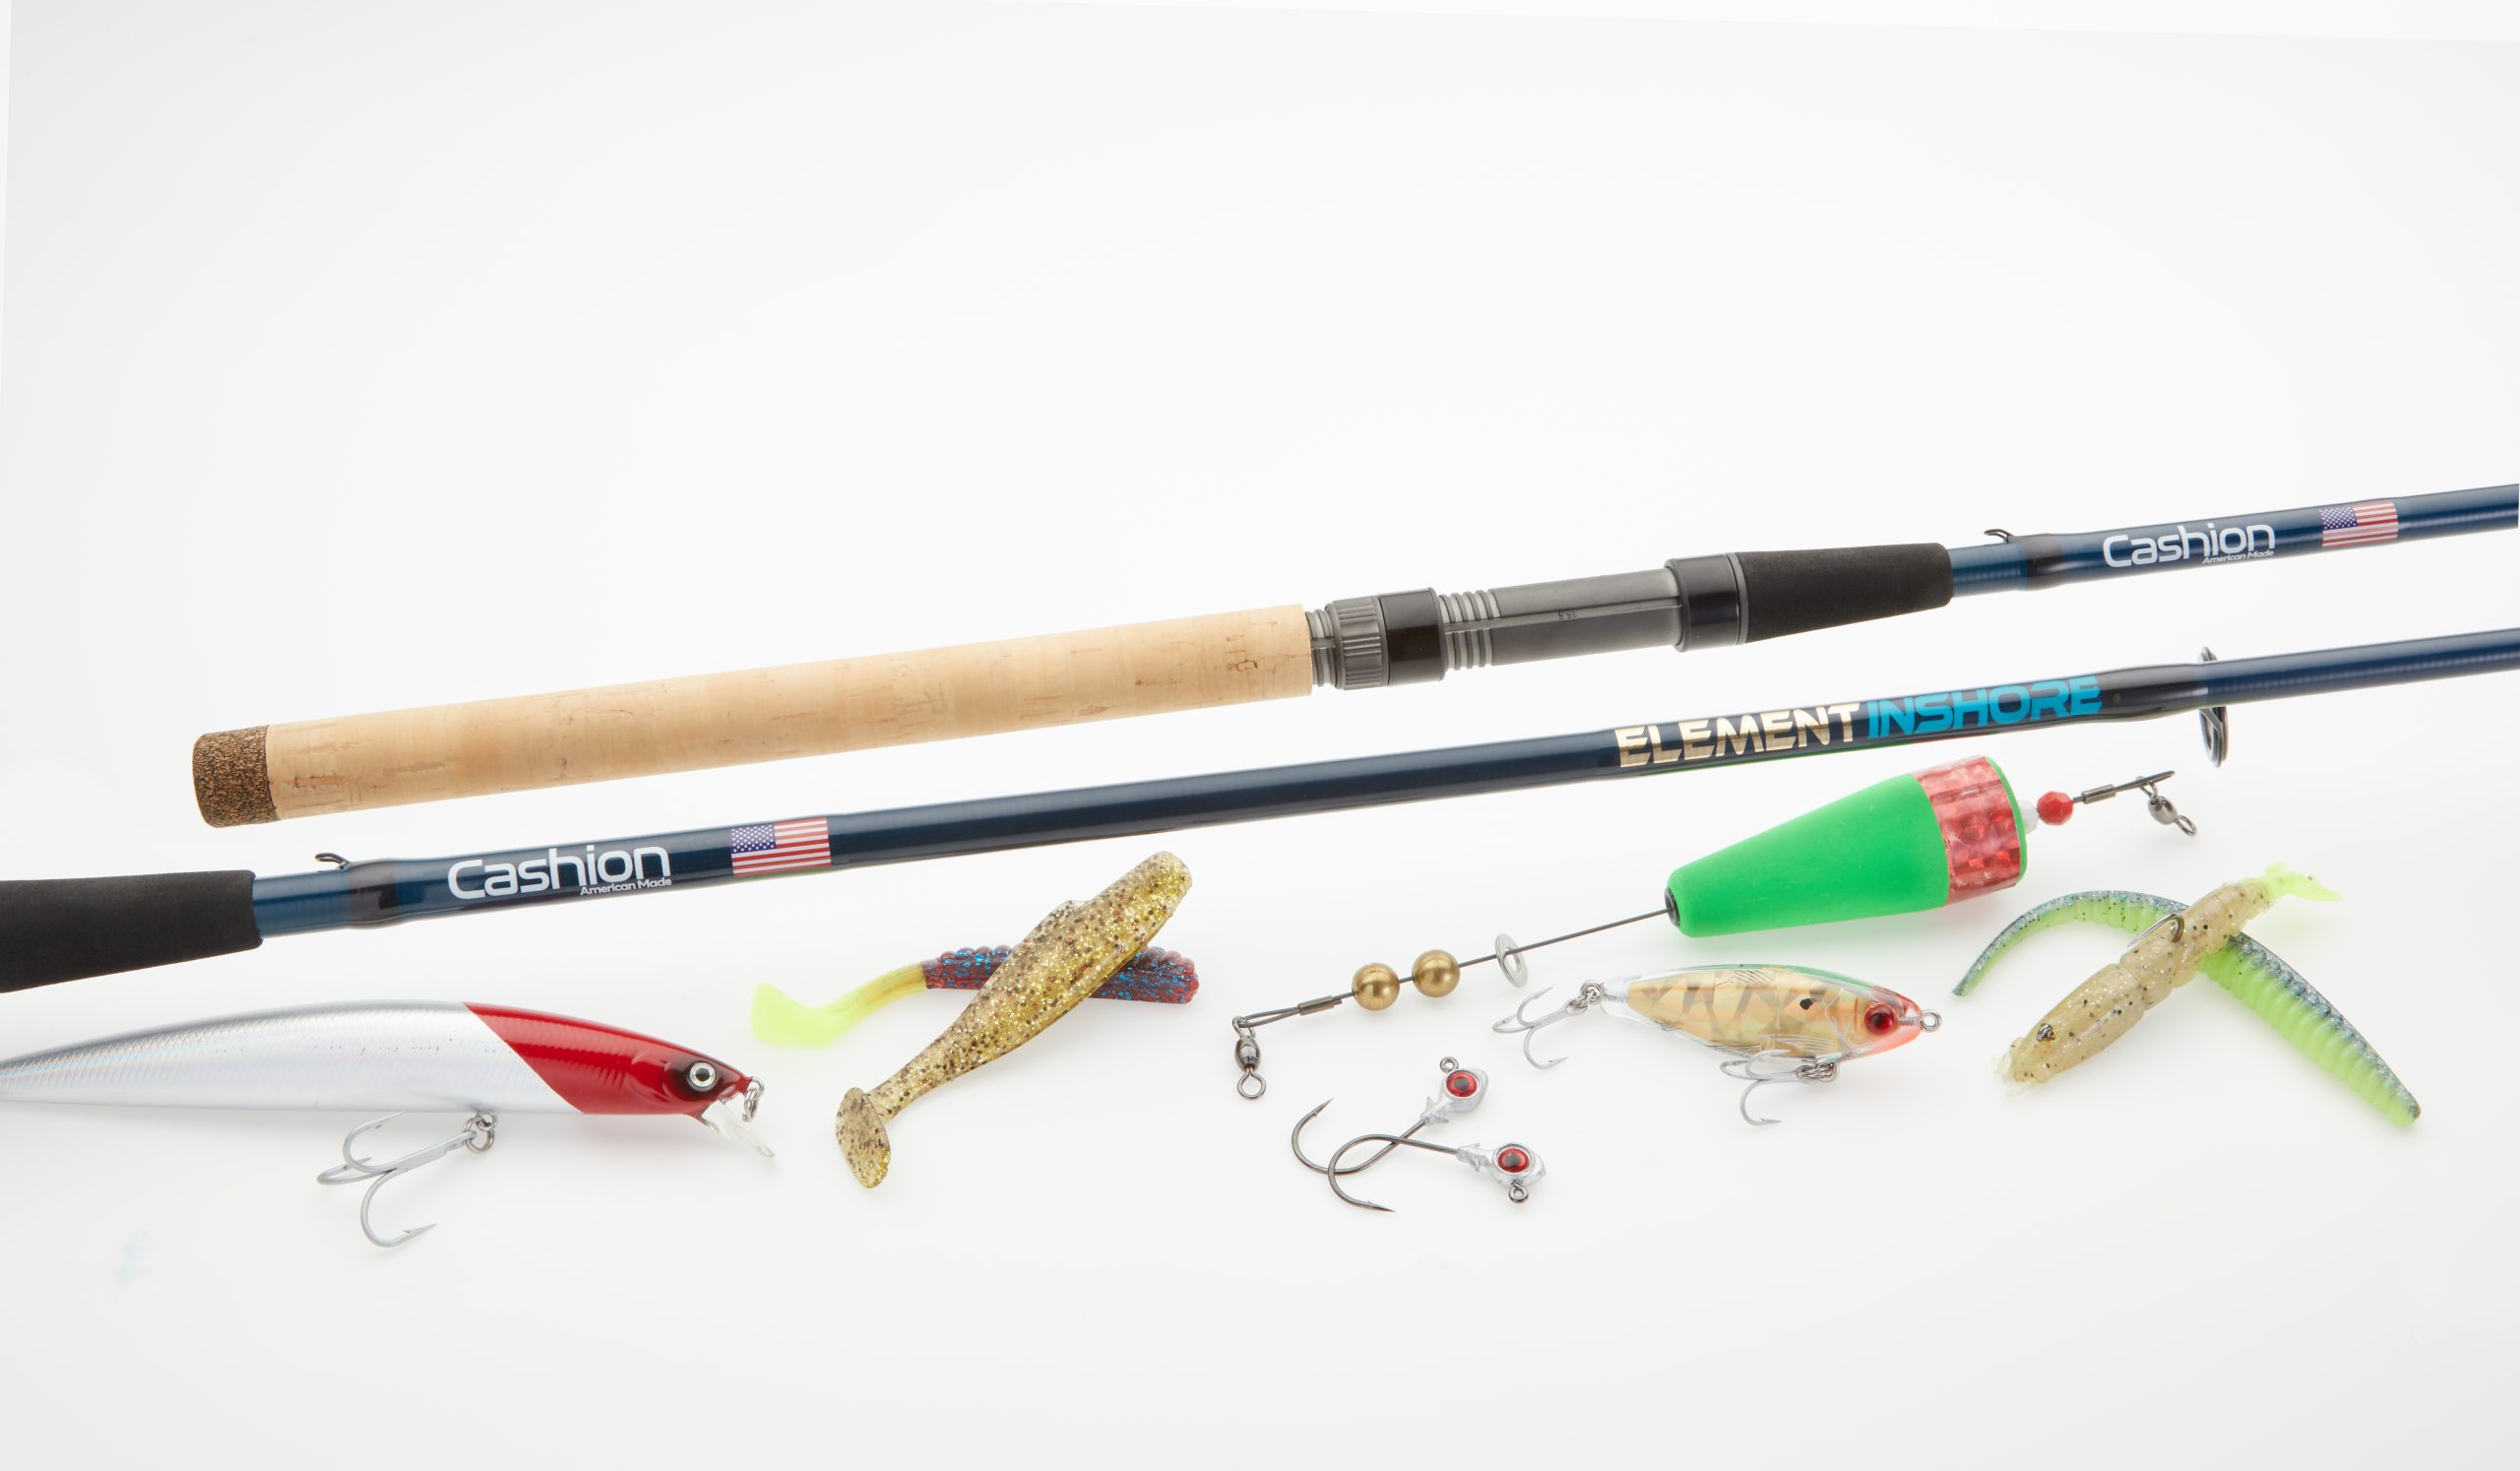 Cashion Fishing Rods ICON Ned Rig Spinning Rod - 7ft, Medium Power, Fast  Action, 1pc